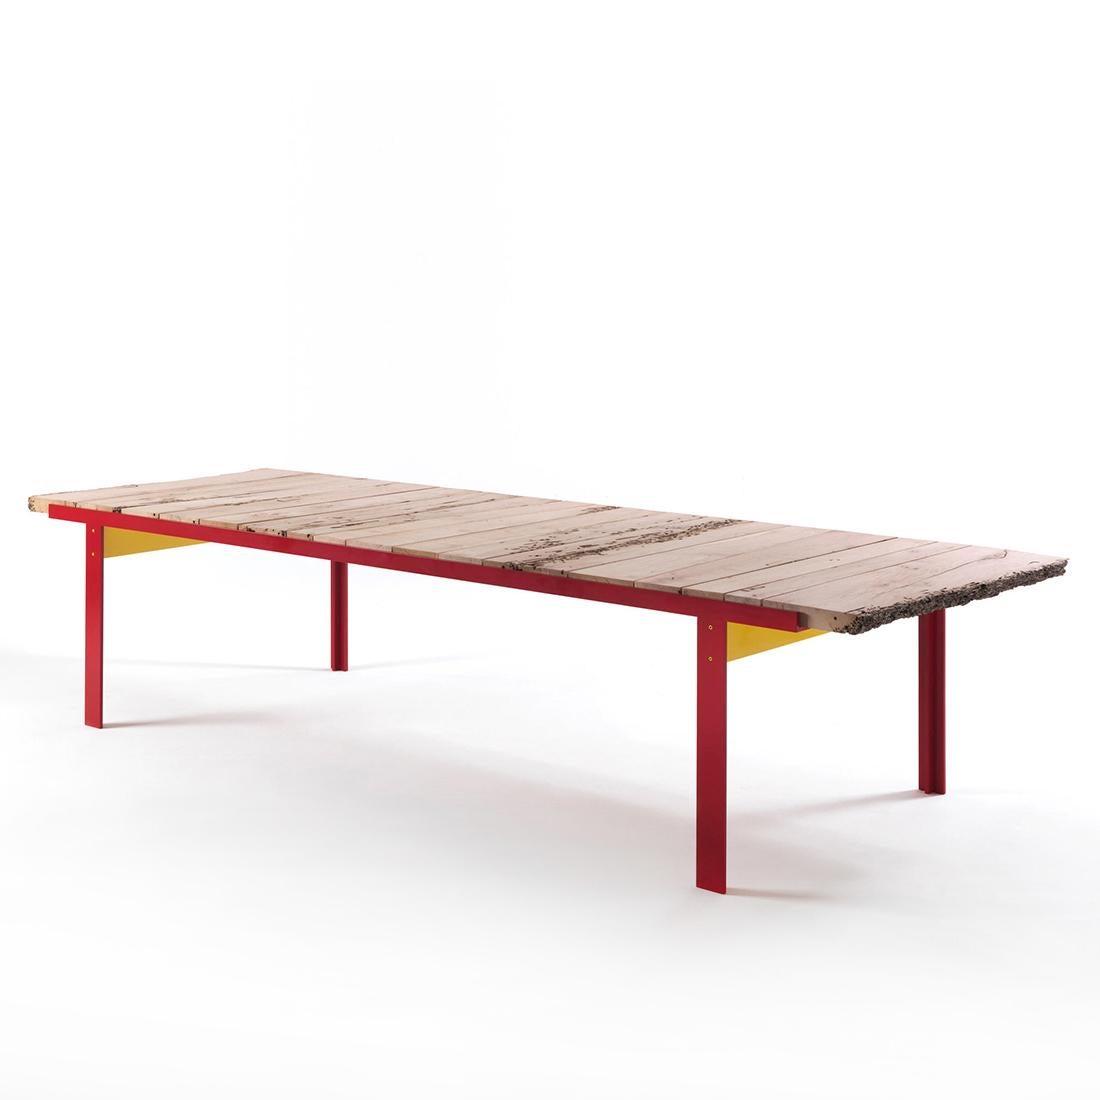 Dining table oak slats red with top in solid oak 
wood from Venice made from irregulary shaped 
solid oakwood slats. Base in iron in red lacquered 
finish. Reinforced structure under the top in iron in 
yellow lacquered finish.
Available in:
L200 x